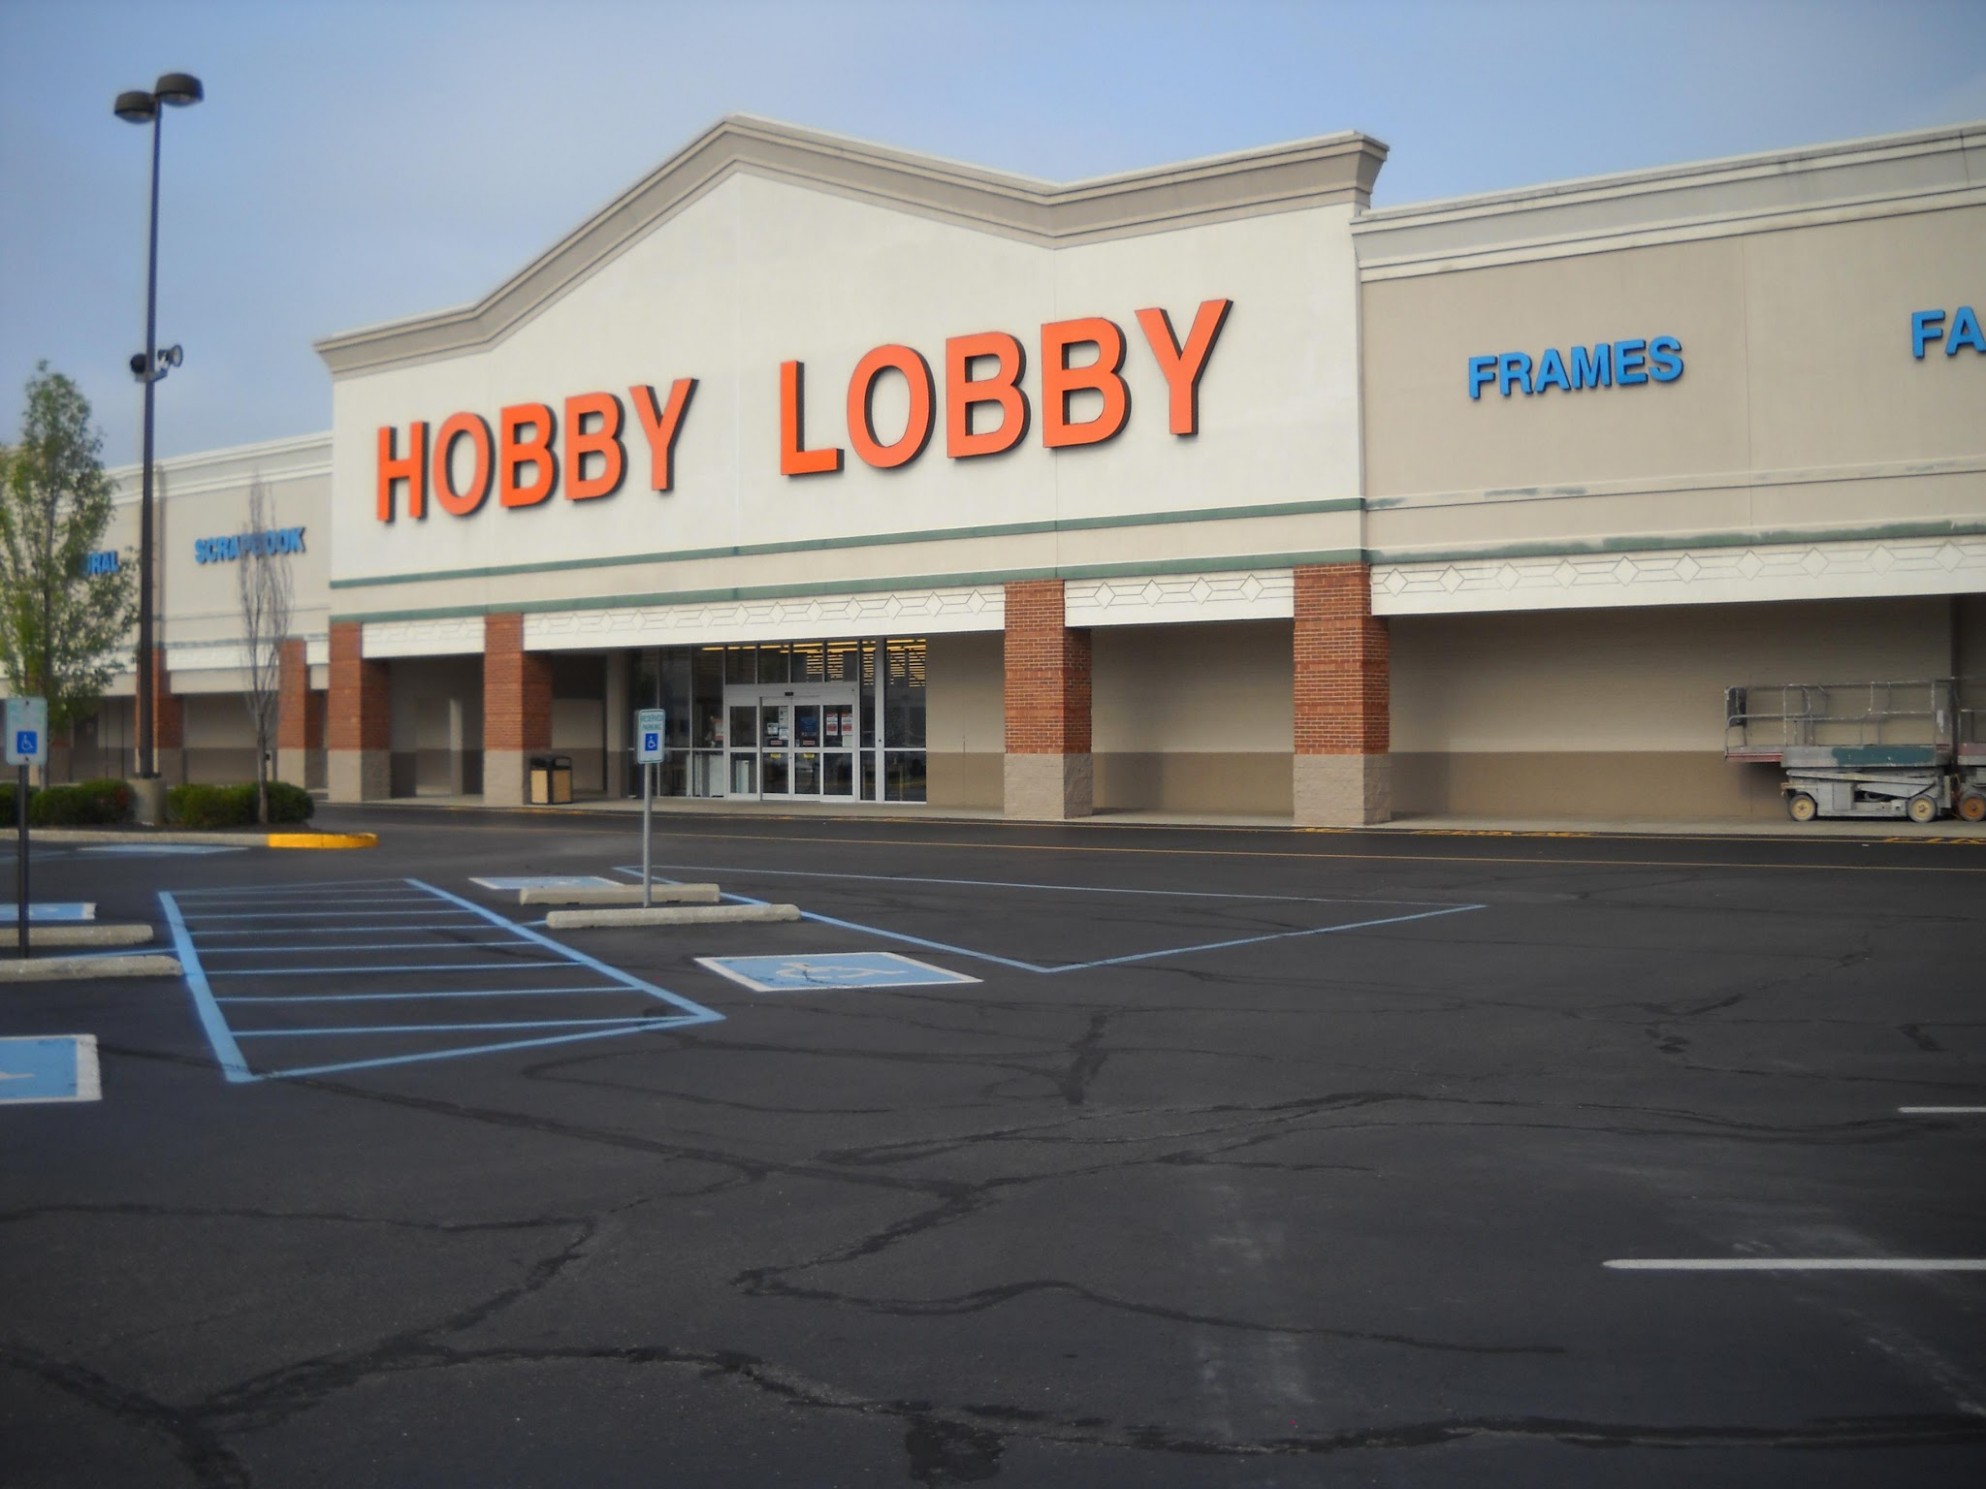 Hobby Lobby 8 Us 8 S, Indianapolis, In 8 Yp